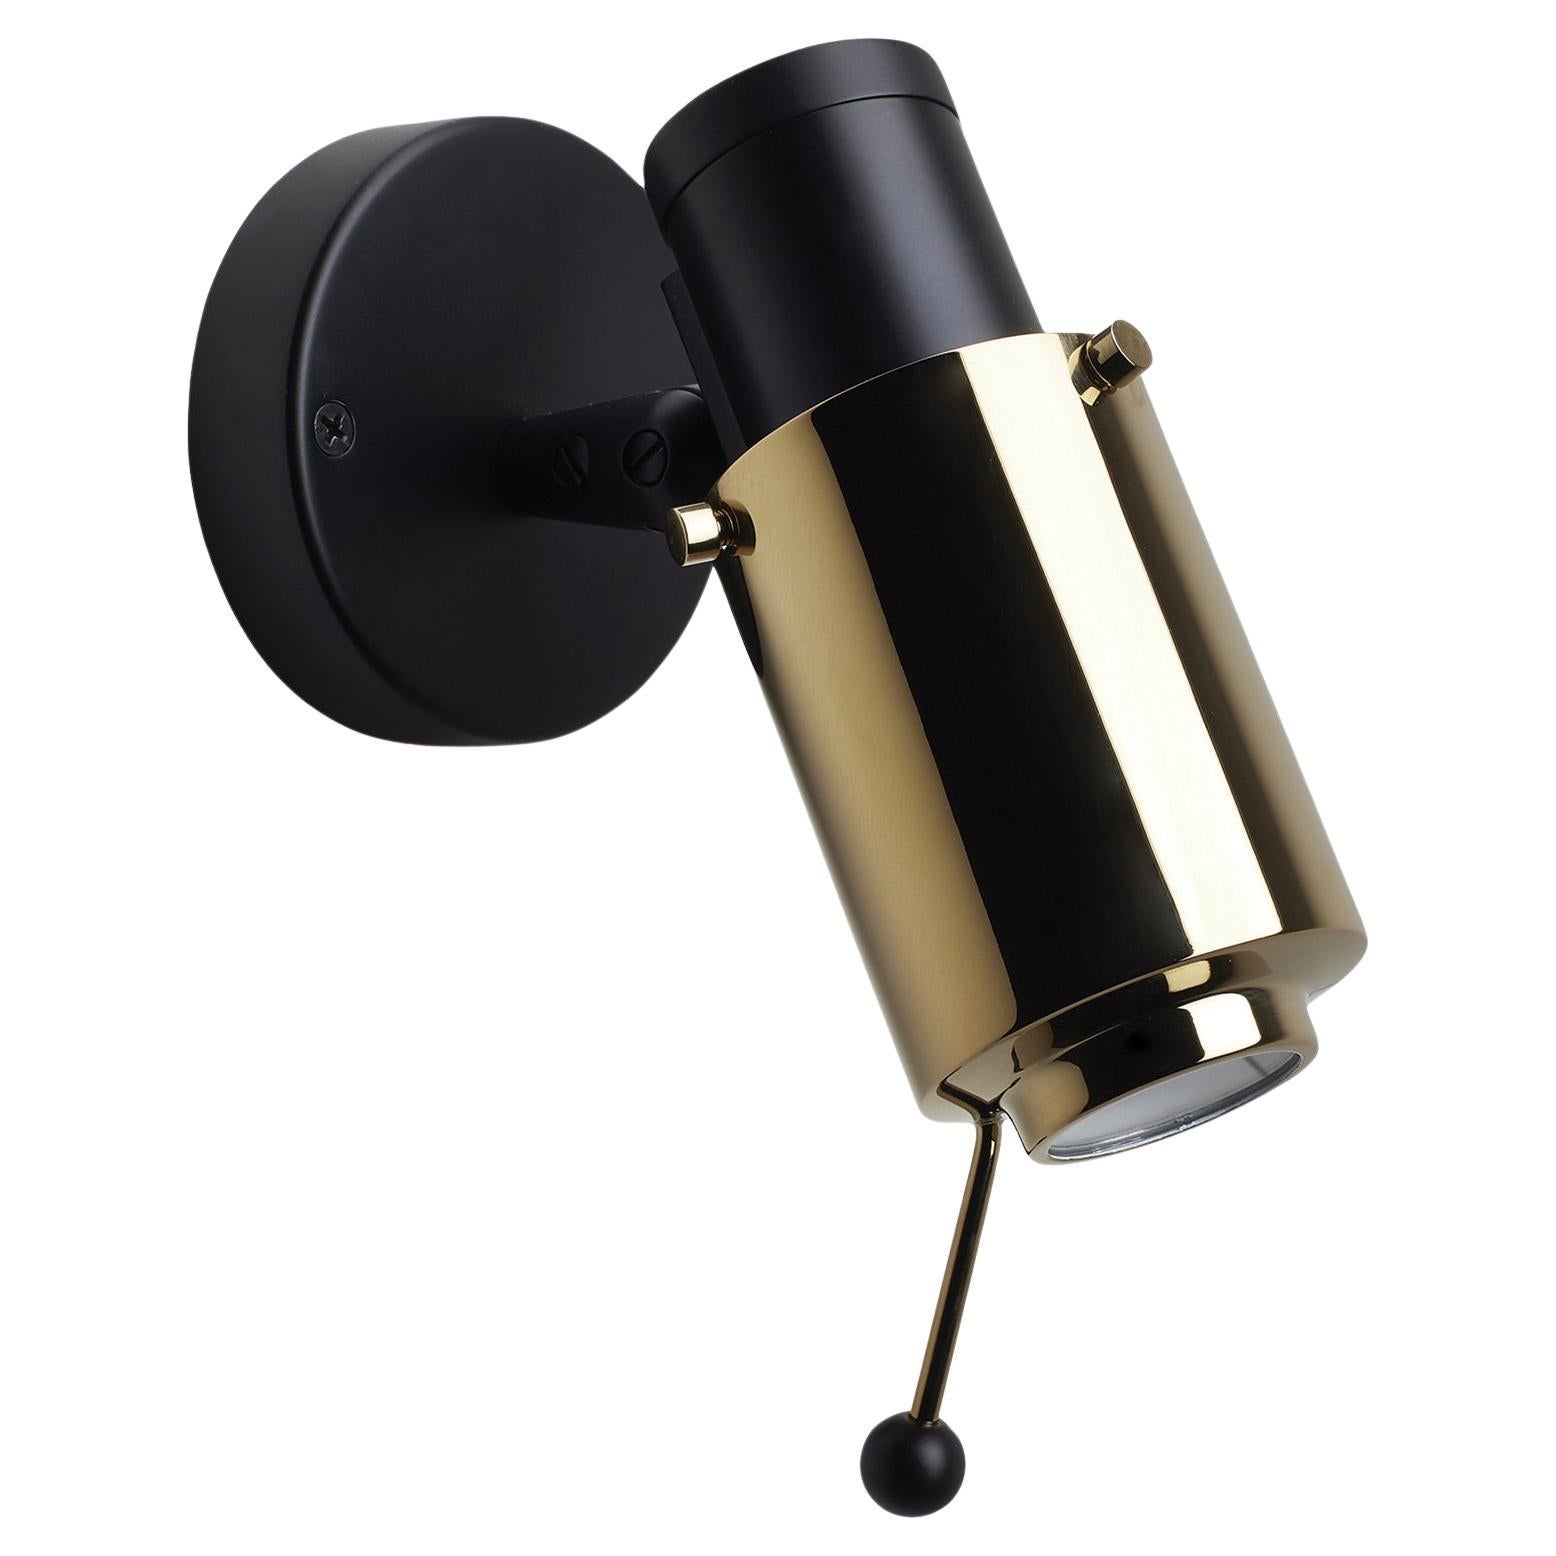 DCW Editions Biny Spot Bulb Wall Lamp in Black-Gold Steel and Aluminium w/ Stick For Sale